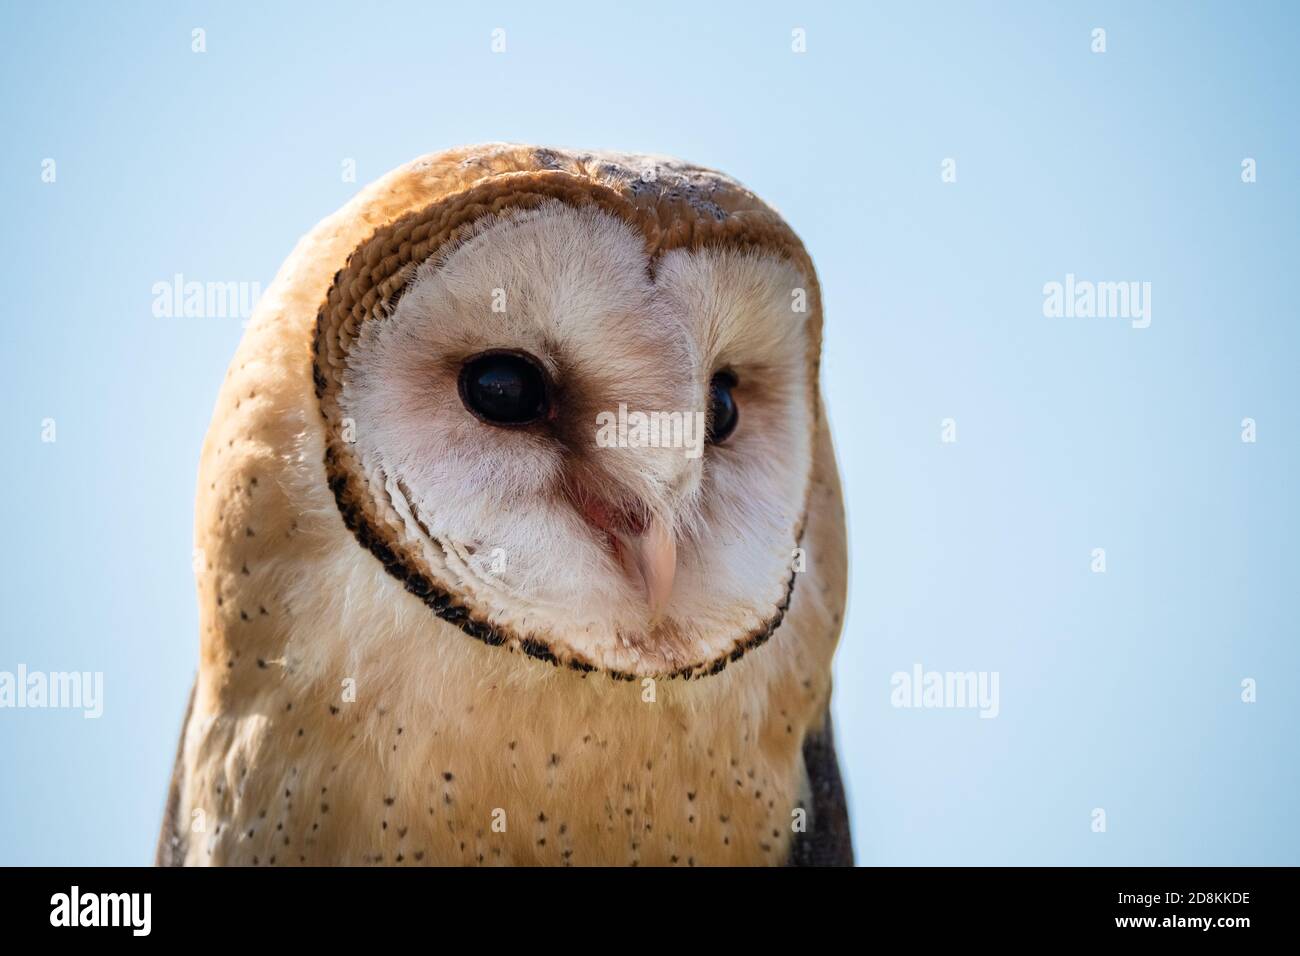 Common Barn Owl Tyto alba Close Up Portrait of the Head and Face Stock Photo